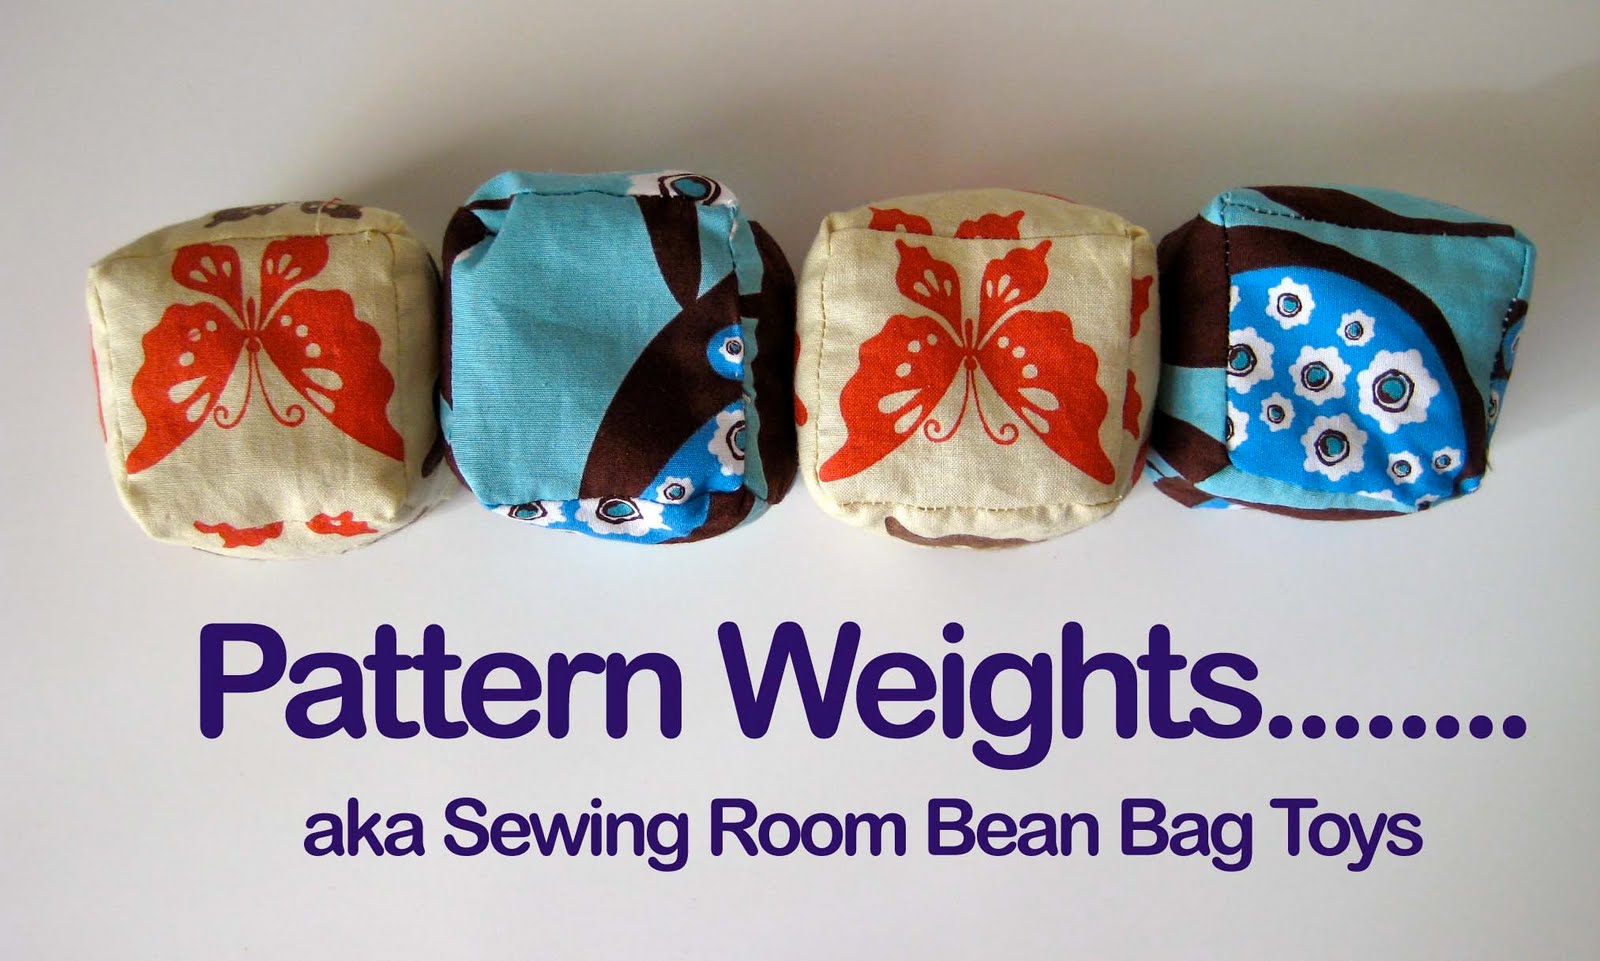 Pattern Weights - what do you use? - Caboodle Textiles